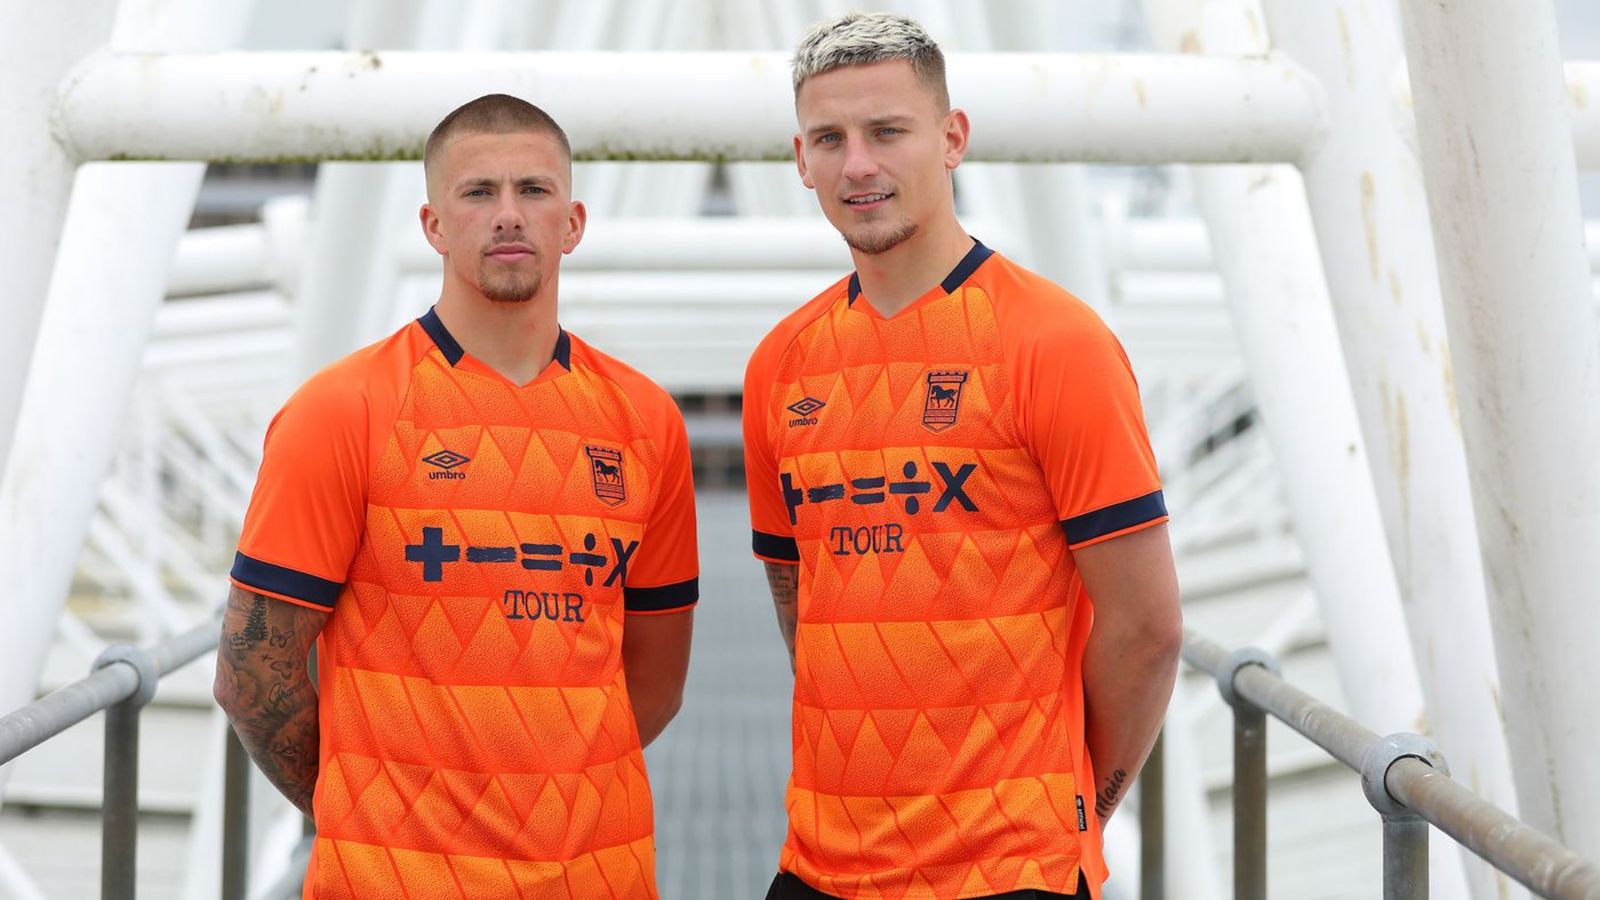 Ipswich Town Umbro Away Kit product image of two players wearing bright orange shirts with black collars and sleeves along with Ed Sheeran's album logos as the sponsor.